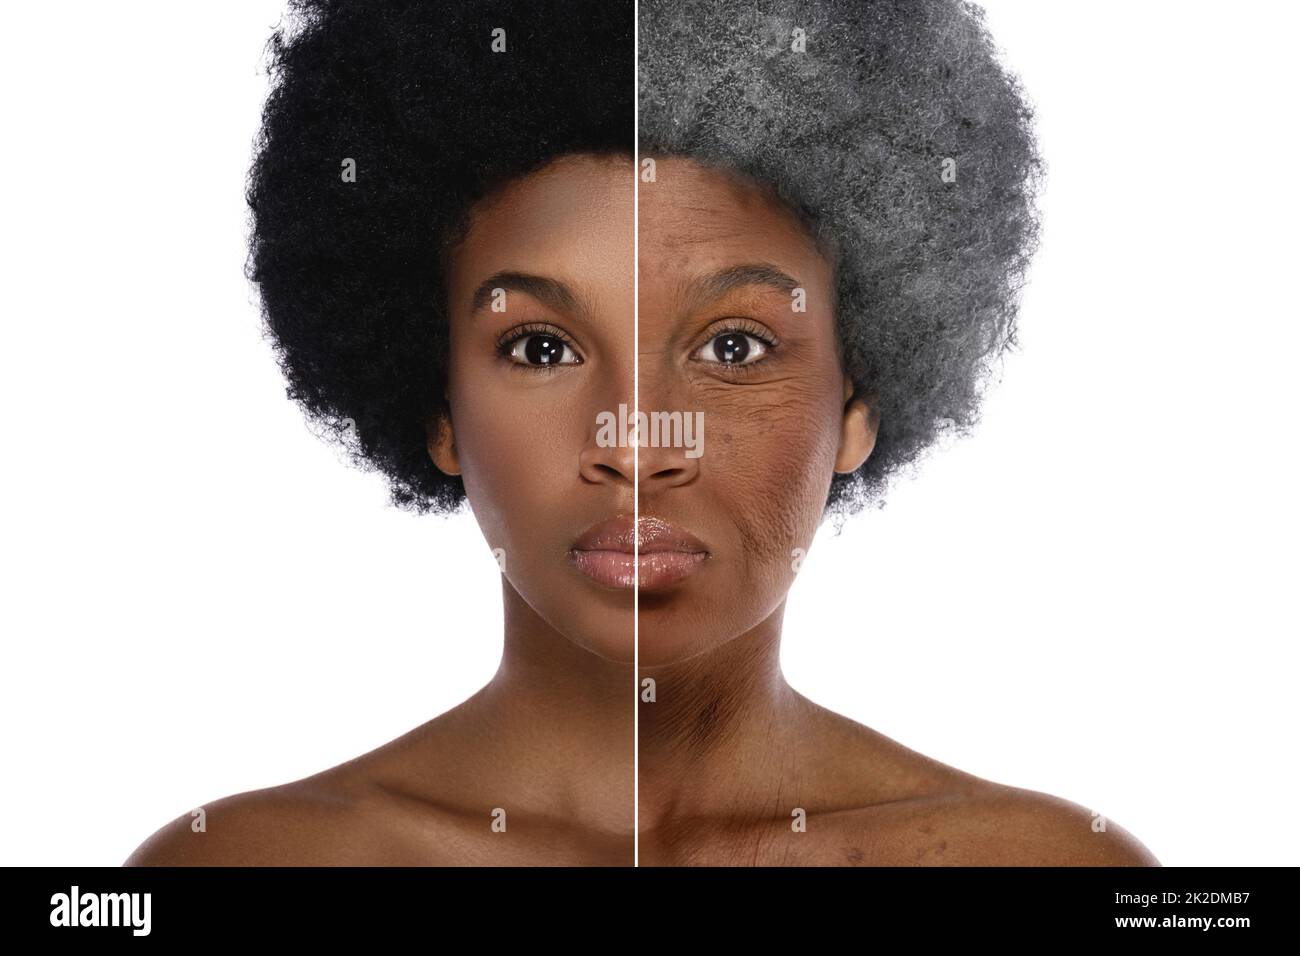 Comparison of young and elderly. African woman on white background. Stock Photo